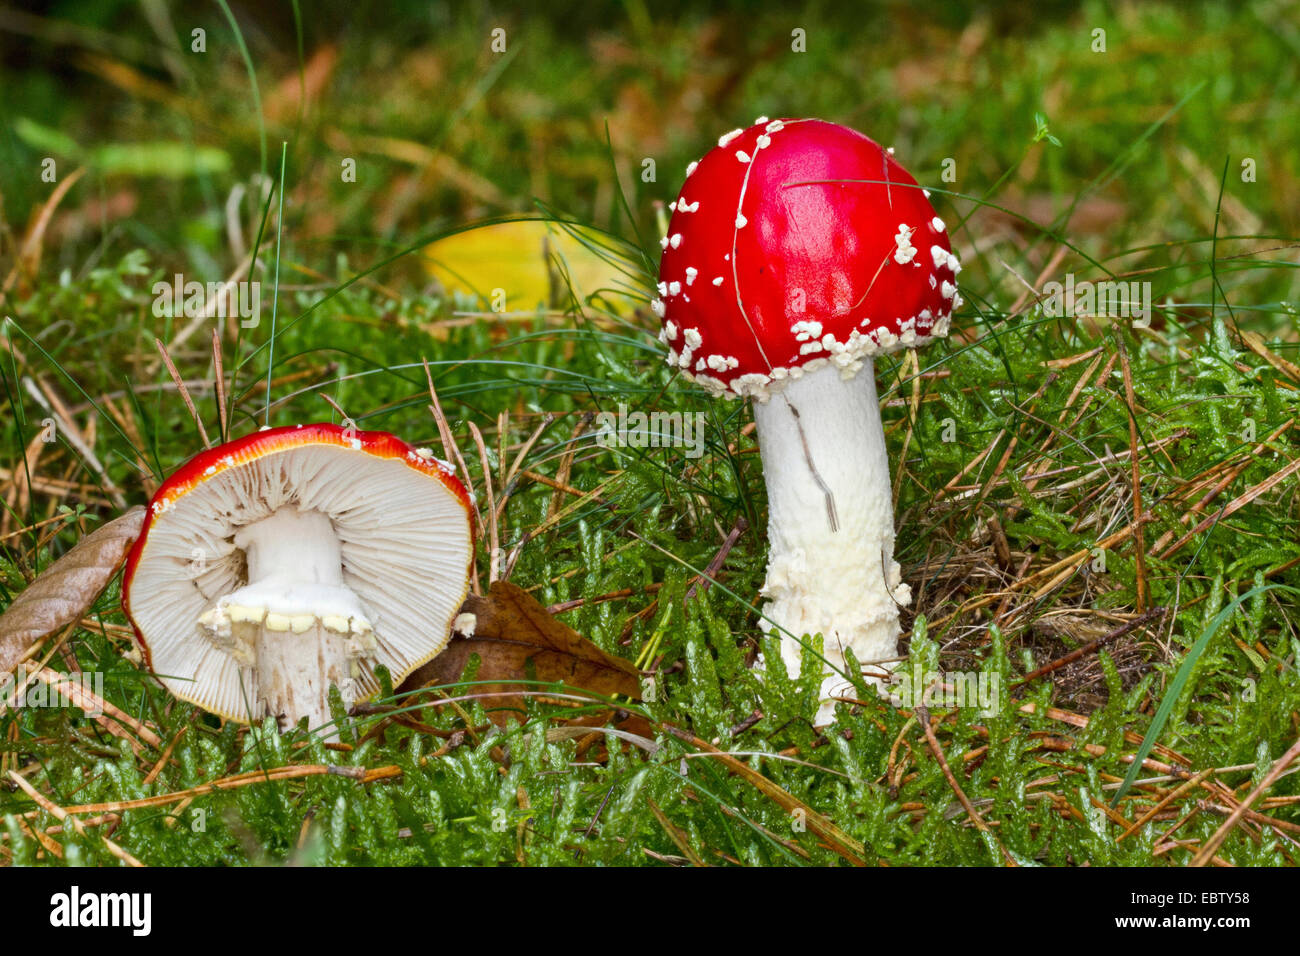 fly agaric (Amanita muscaria), two fruiting bodies in moss on forest floor, Germany, Mecklenburg-Western Pomerania Stock Photo